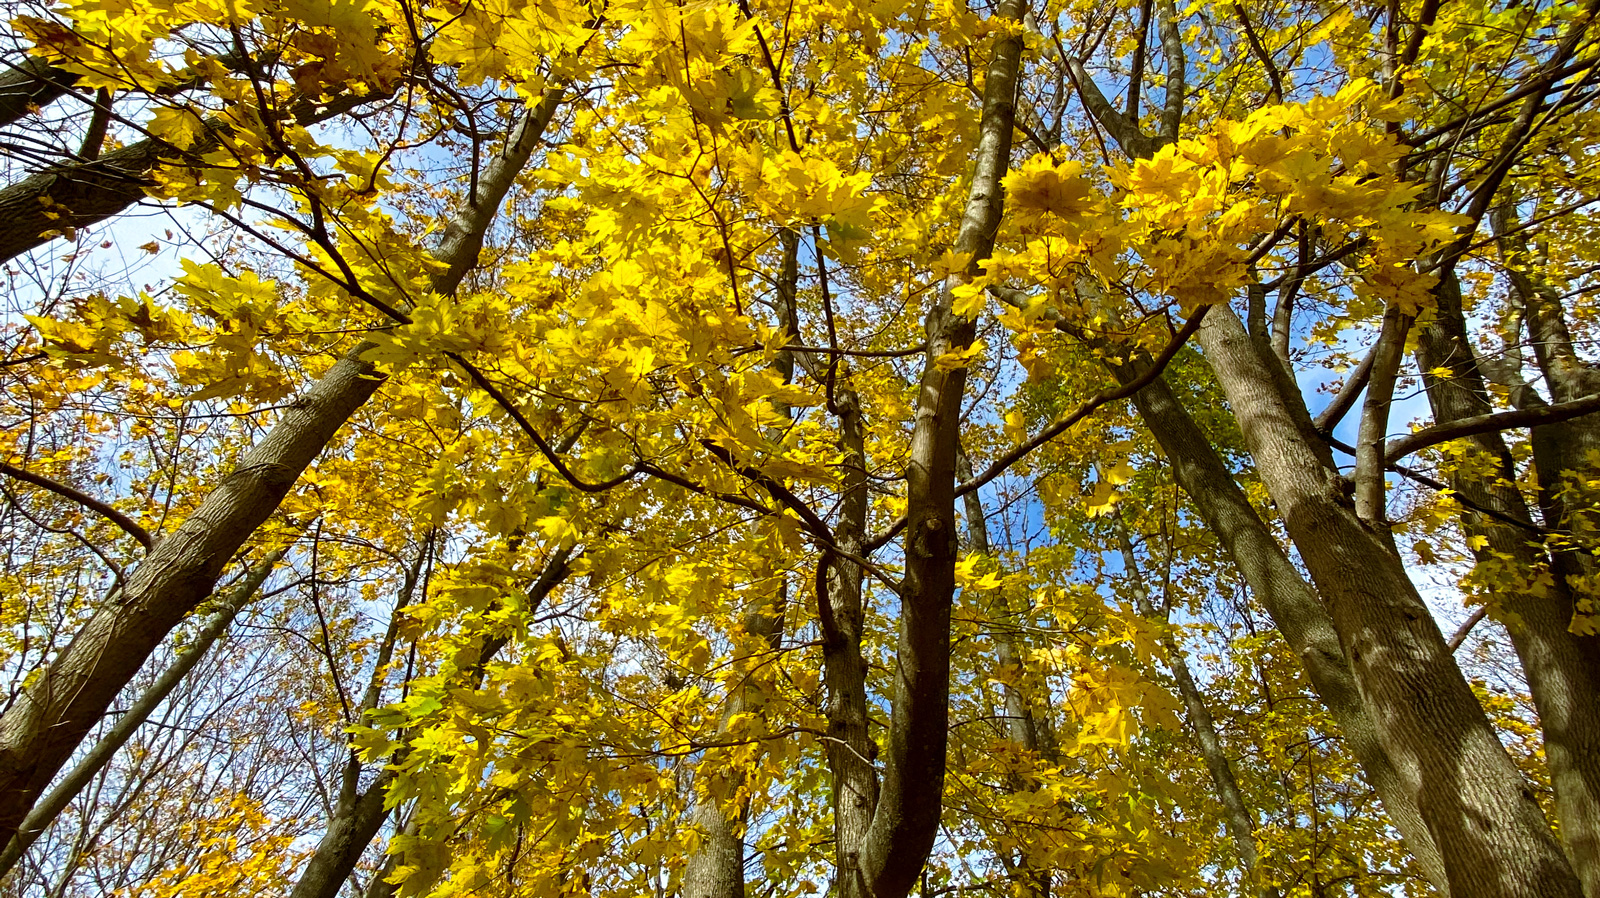 looking up underneath fall trees with yellow leaves